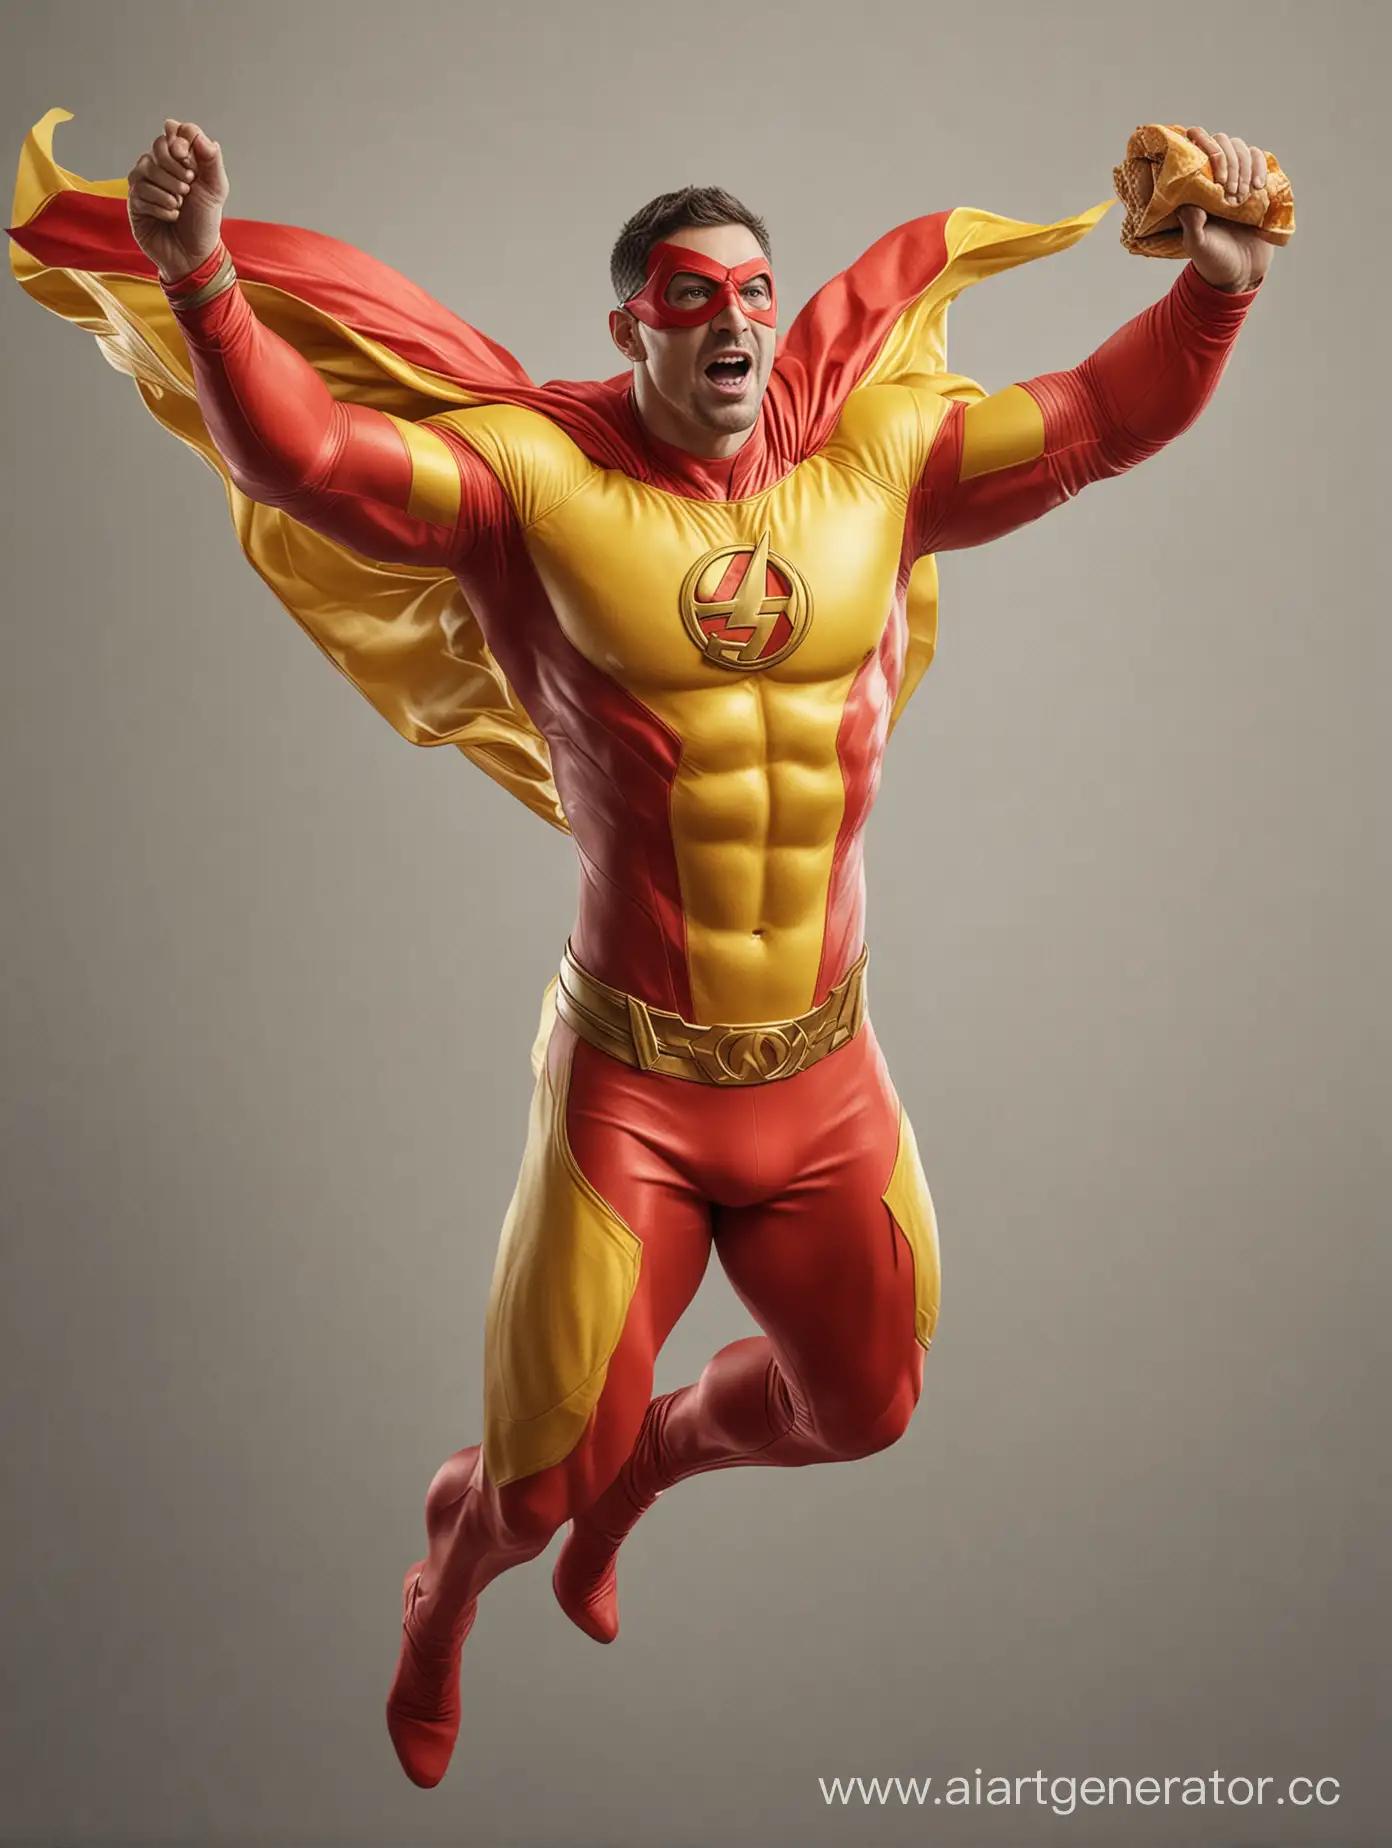 Flying-Superhero-with-Shawarma-Hyperrealistic-Comic-Book-Character-in-RedYellow-Costume